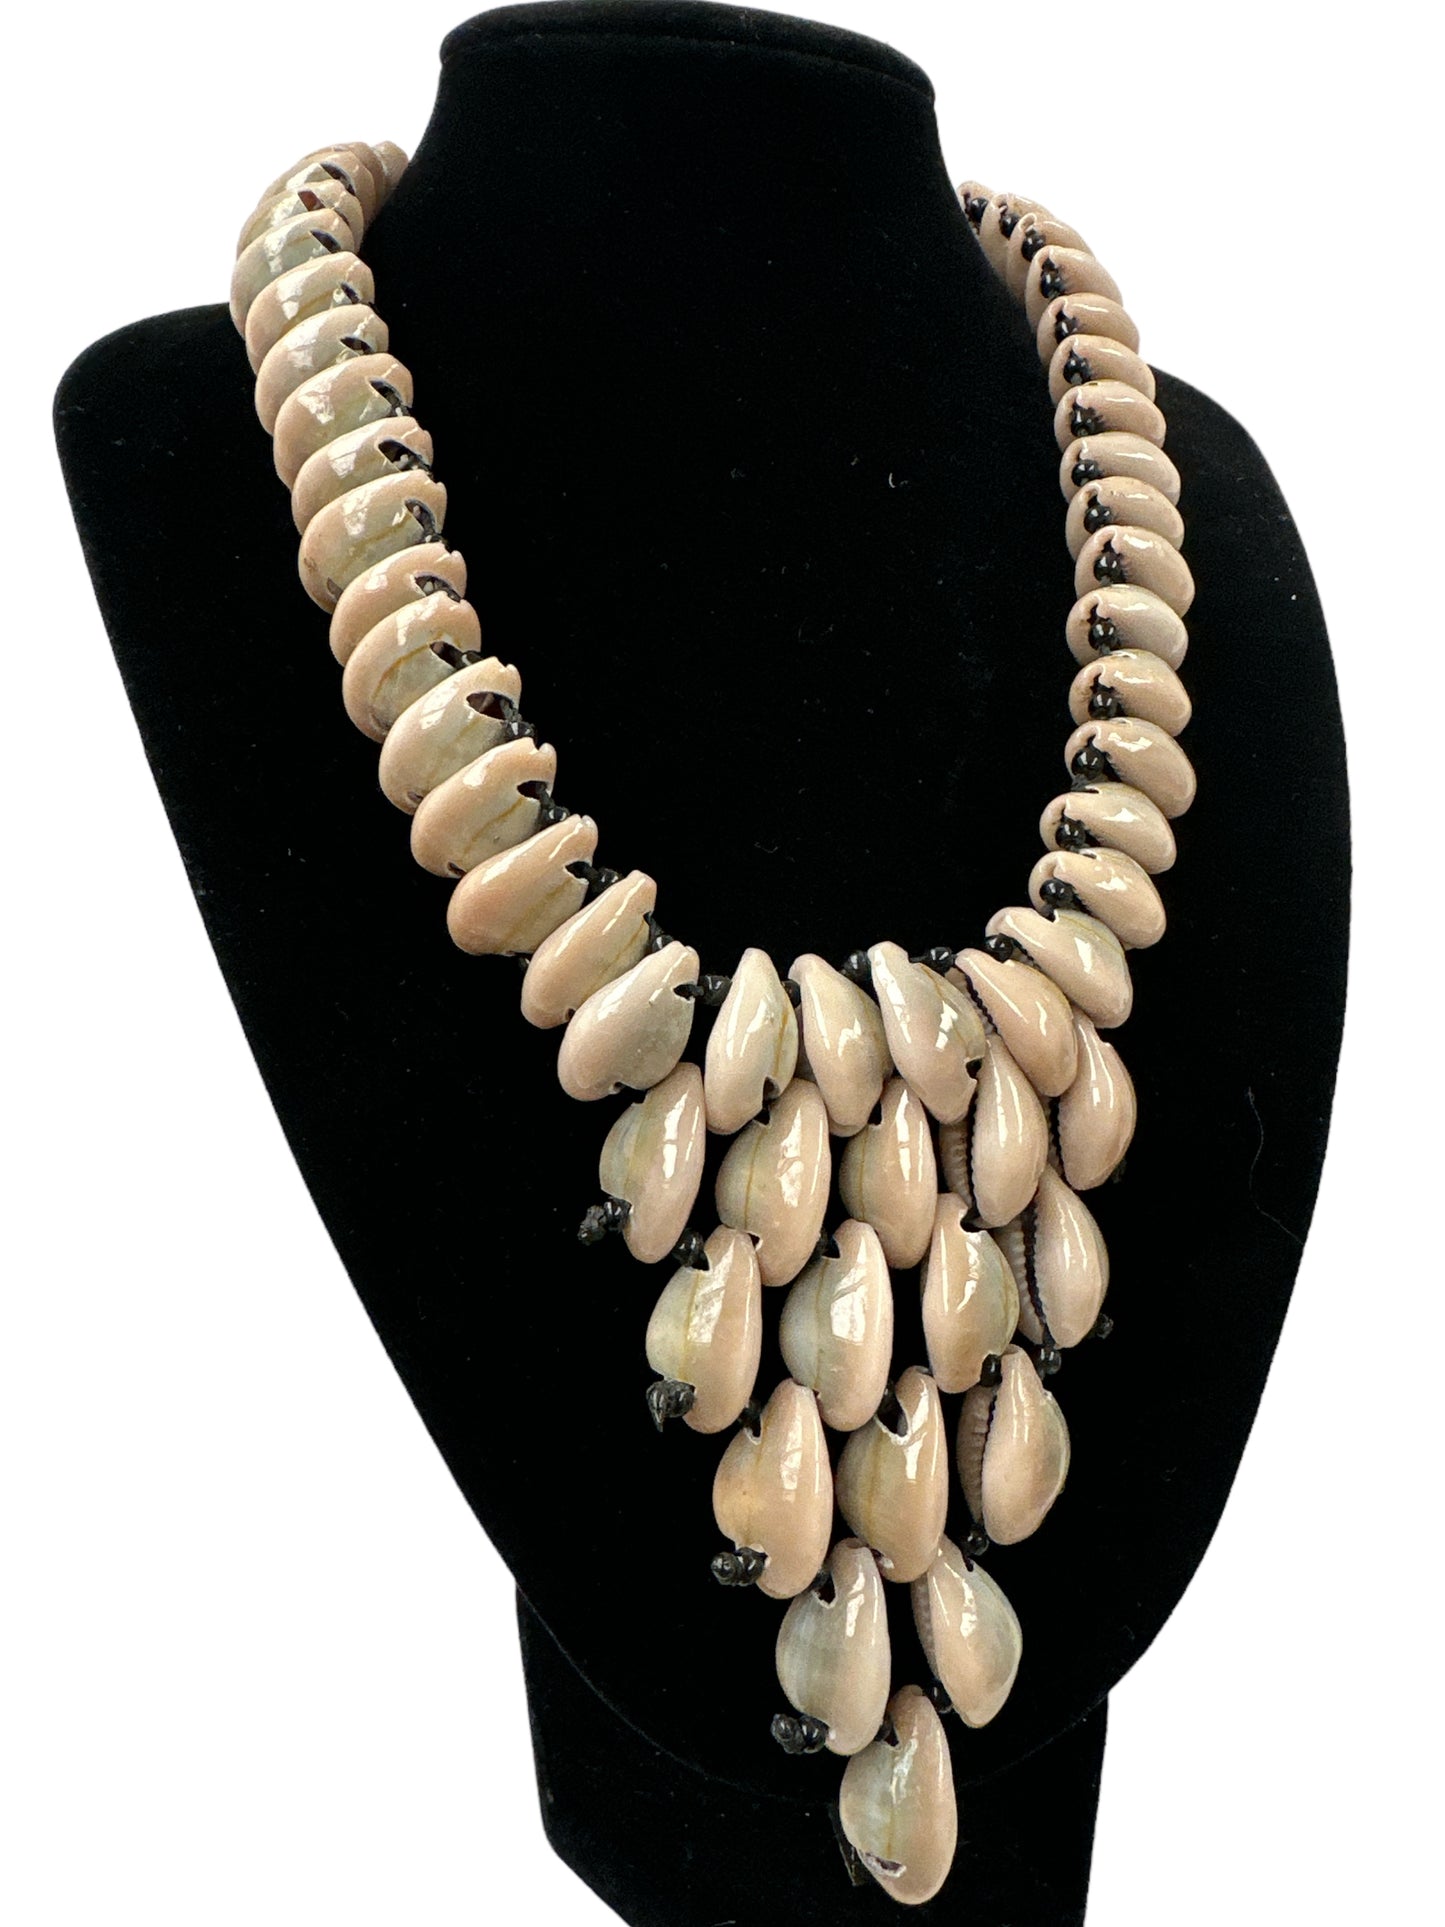 Authentic African Cowrie Seashells Beaded Necklace Pendant